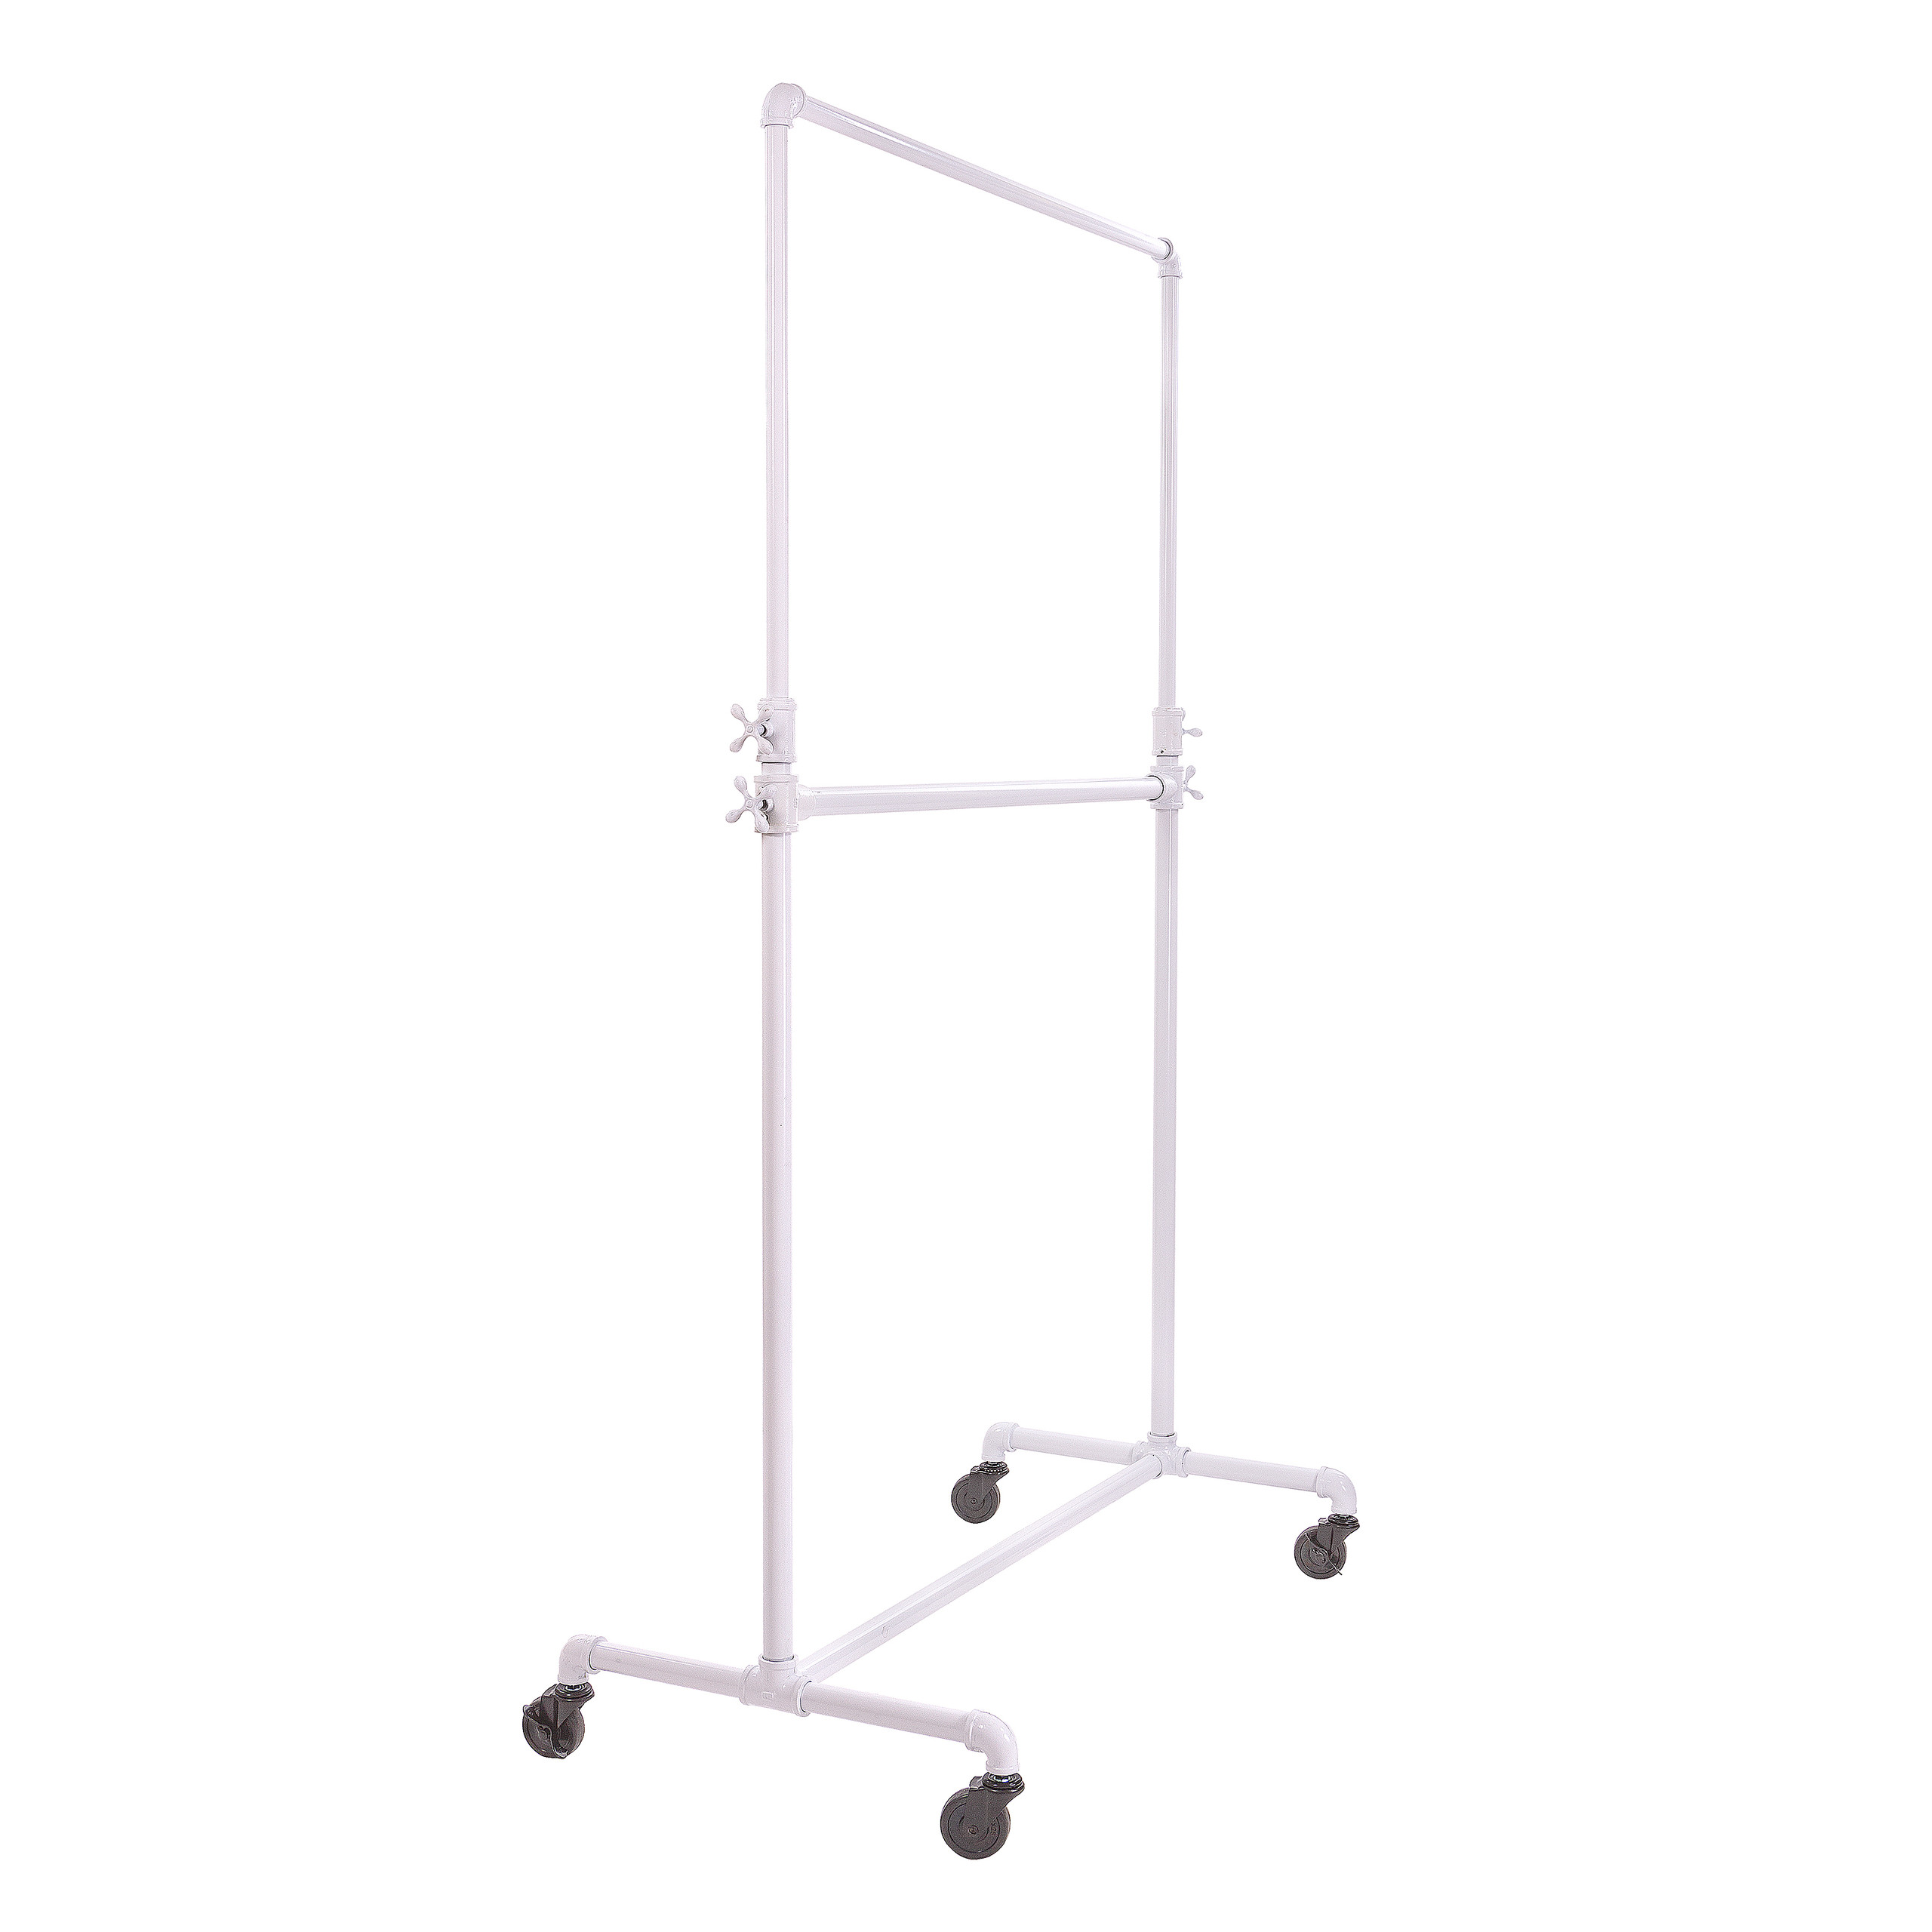 Pipeline Clothing Rack Add-On-Hangbar | Product Display Solutions